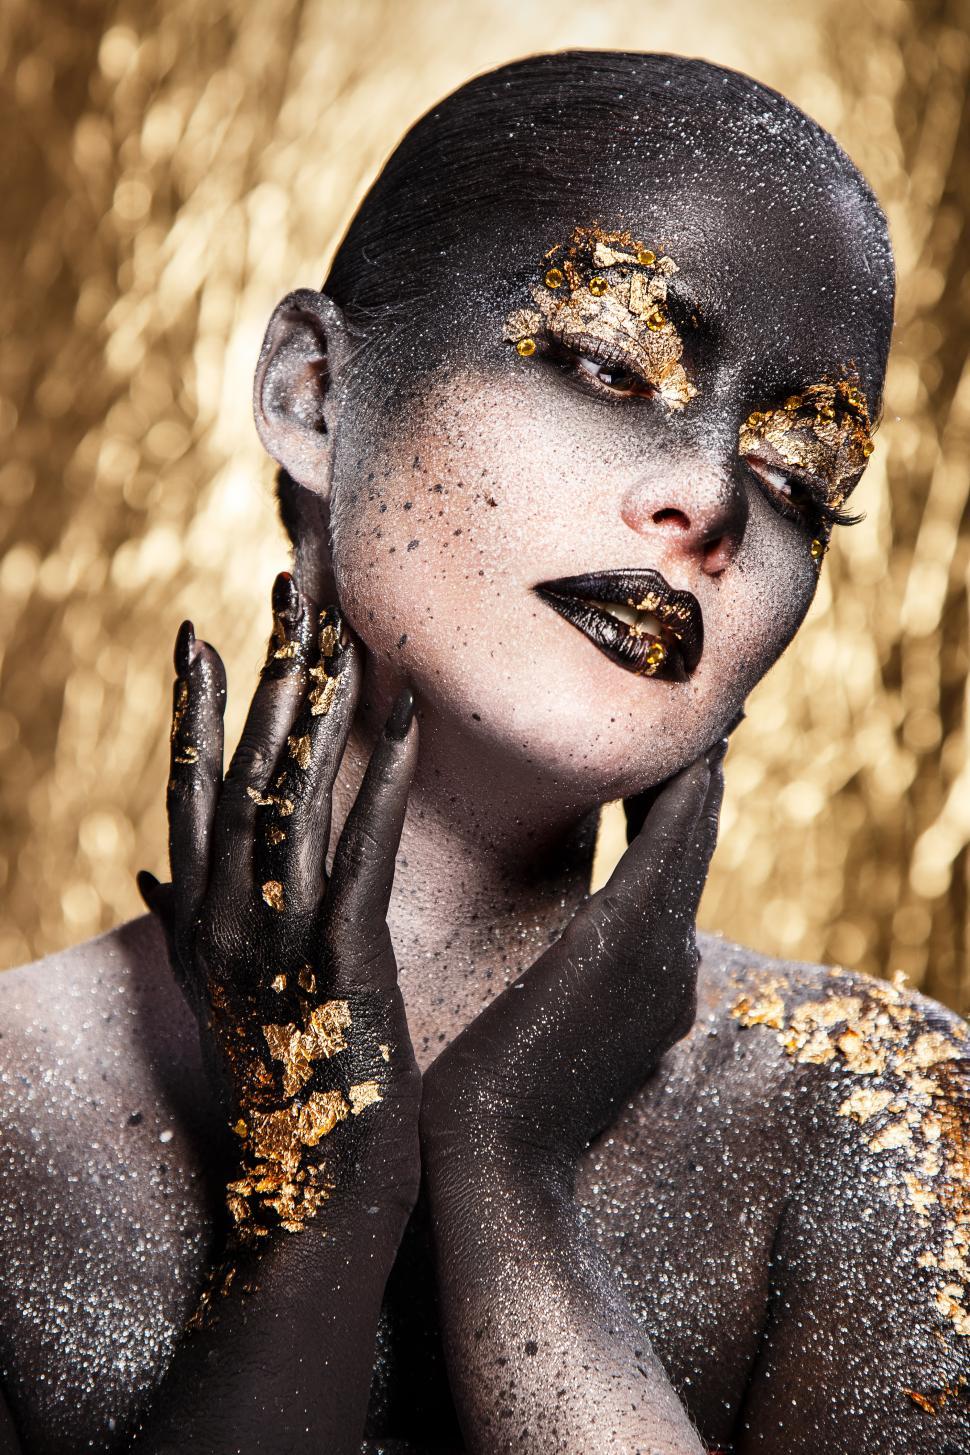 Download Free Stock Photo of Dramatic contrasting artistic makeup 